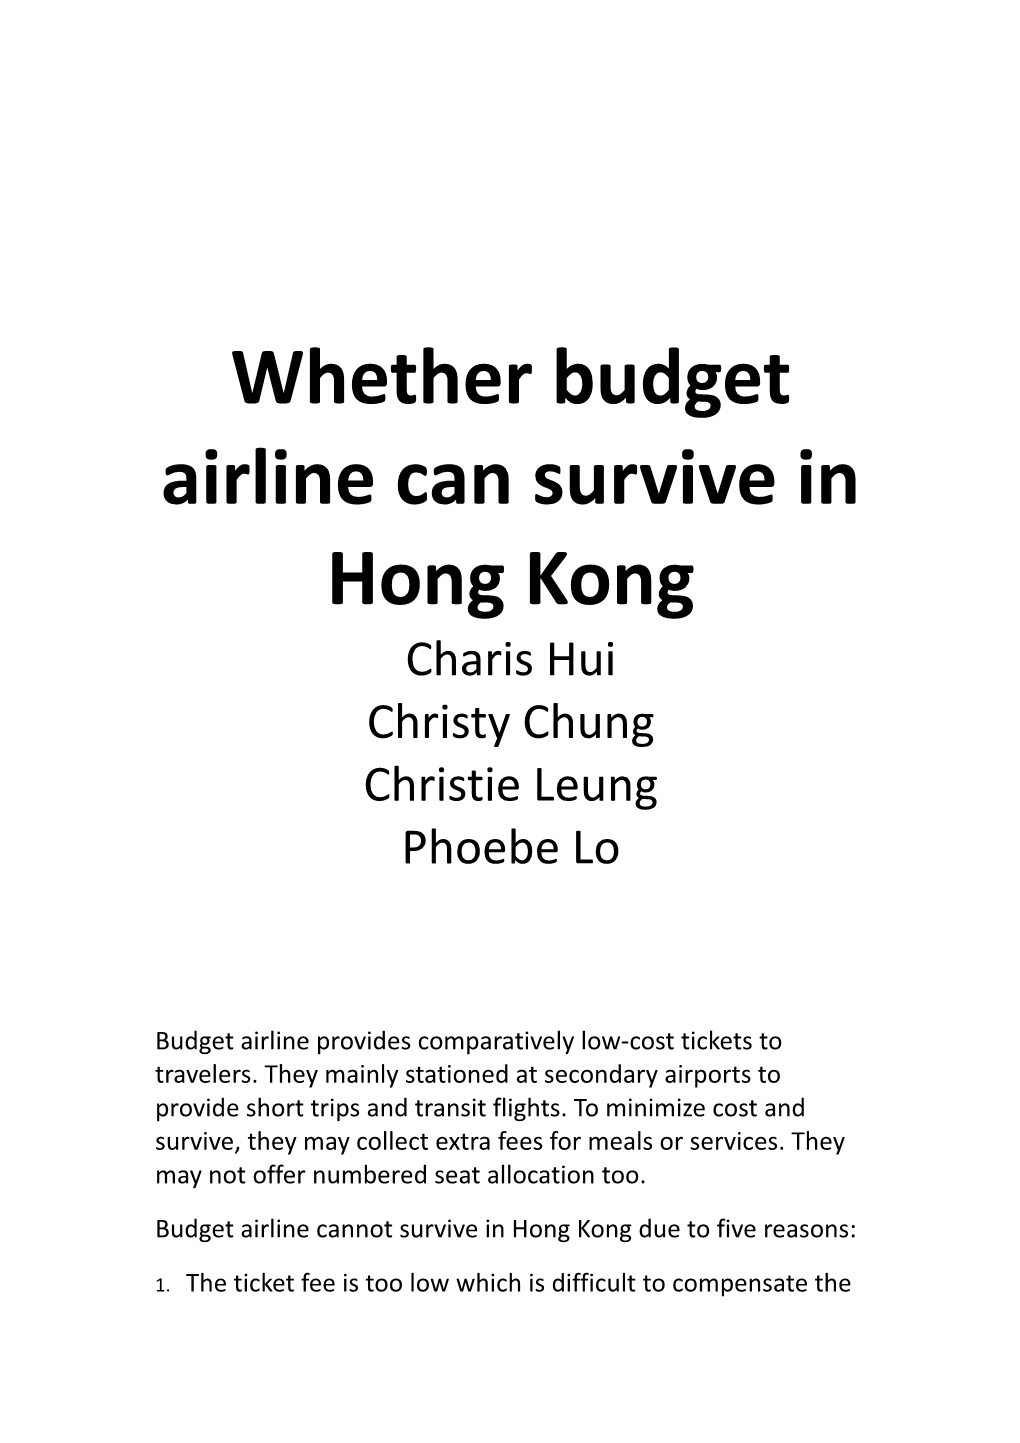 Whether Budget Airline Can Survive in Hong Kong